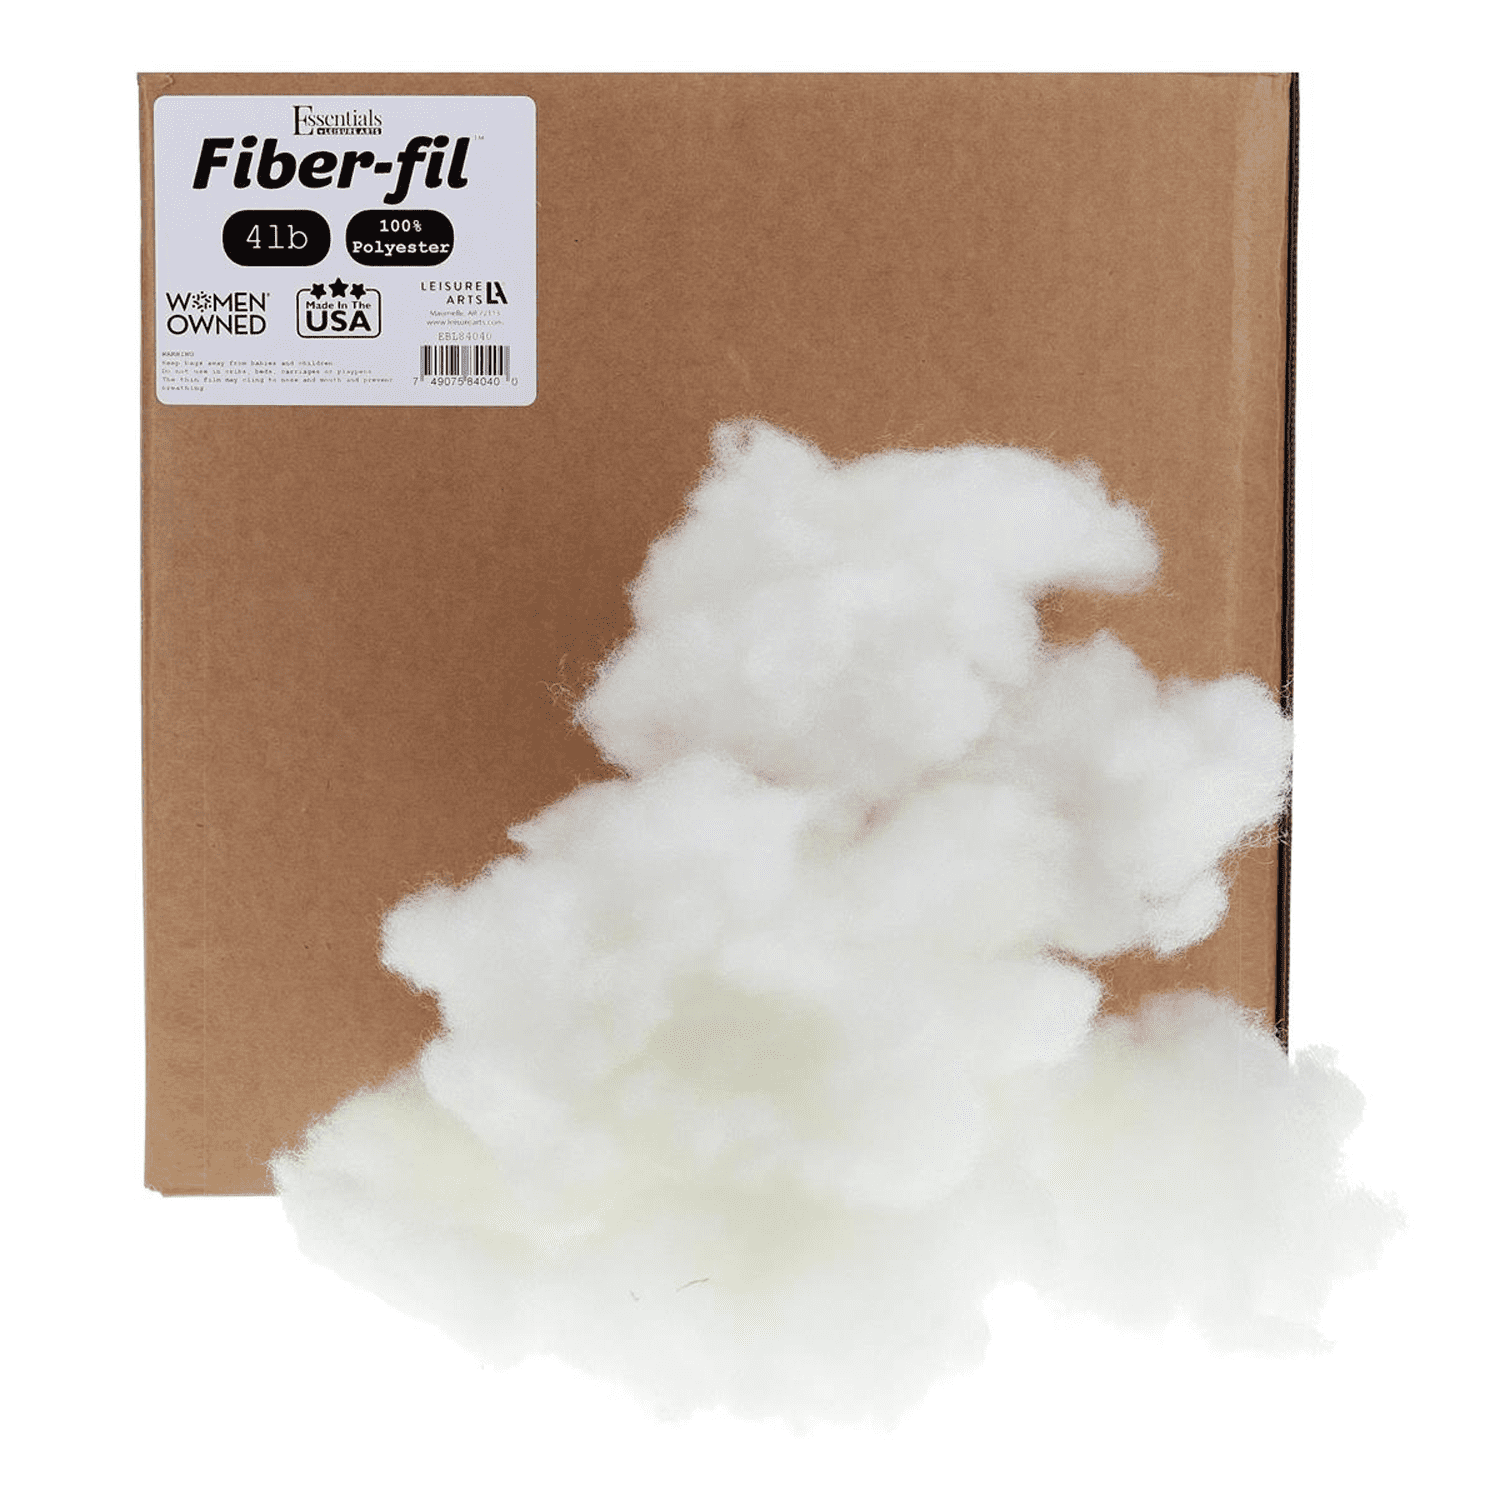 Essentials by Leisure Arts Polyester Fiber-Fil, Premium Fiber-Fil Stuffing,  4lb/64oz Box, High Resilience Polyfill for filling Stuffed Animals, Crafts,  Pillow Stuffing, Cushion Stuffing 